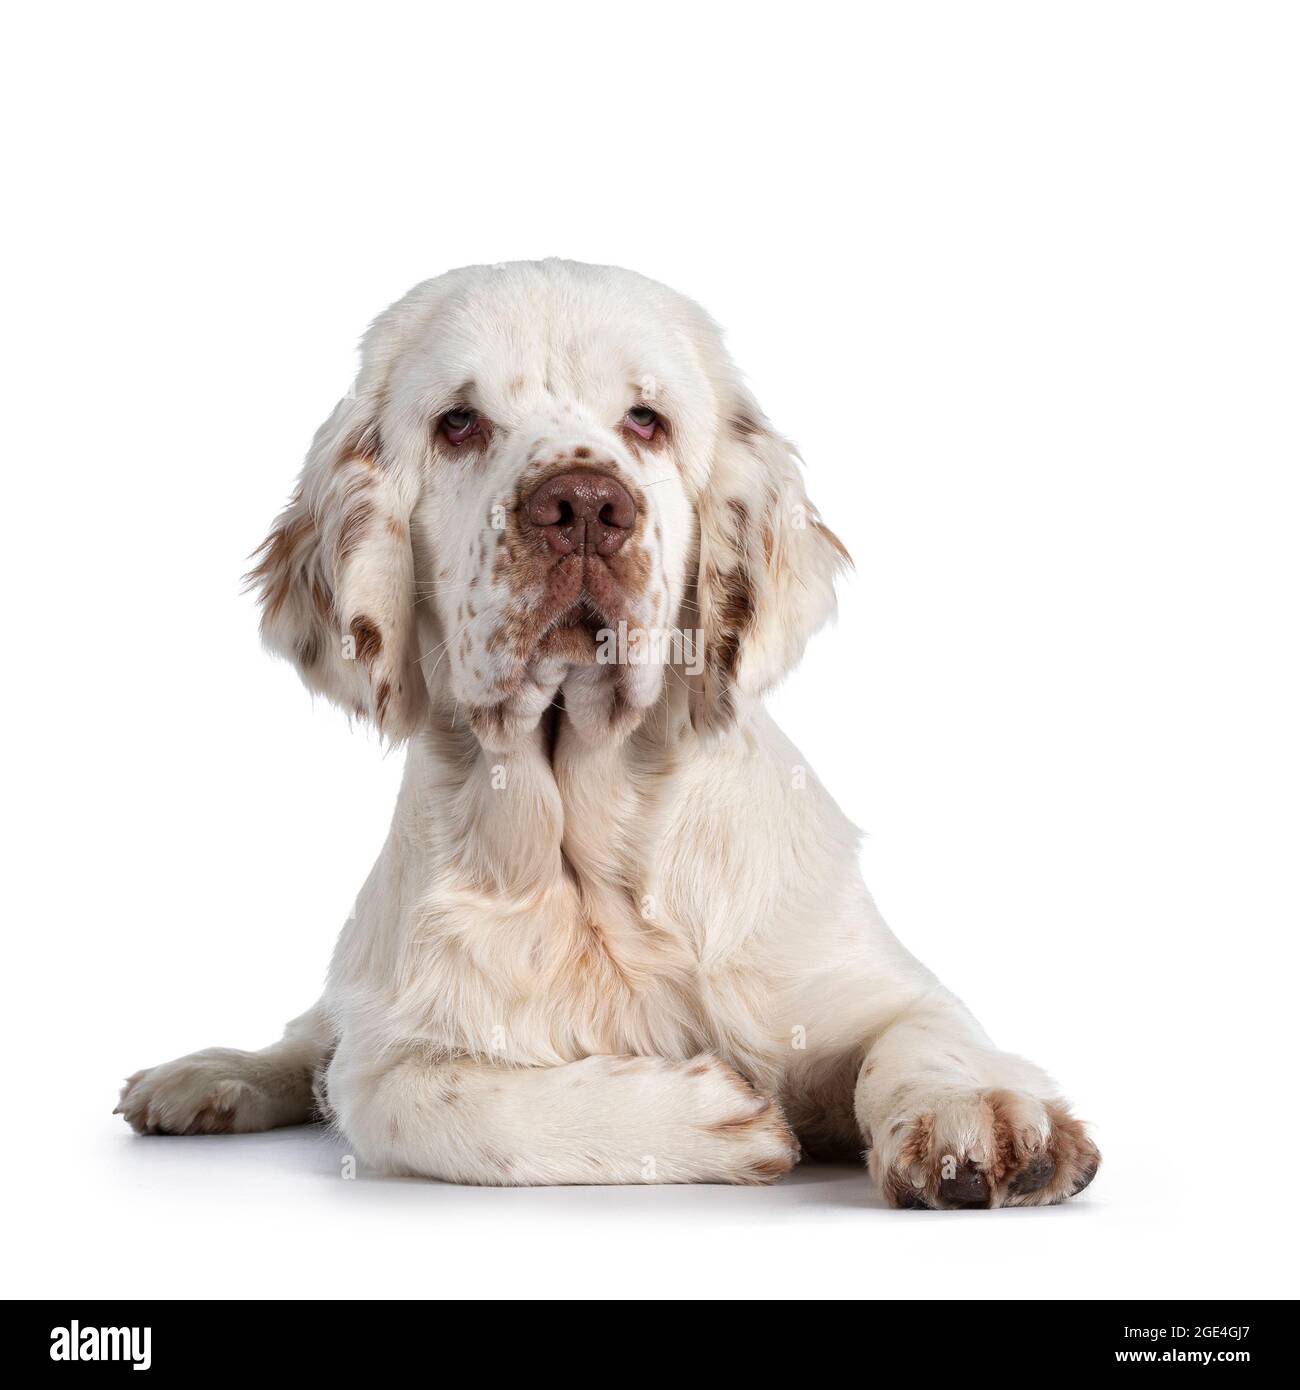 Cute Clumber Spaniel dog pup, laying down facing front. Looking towards camera with the typical droopy eyes. Isolated on a white background. Stock Photo